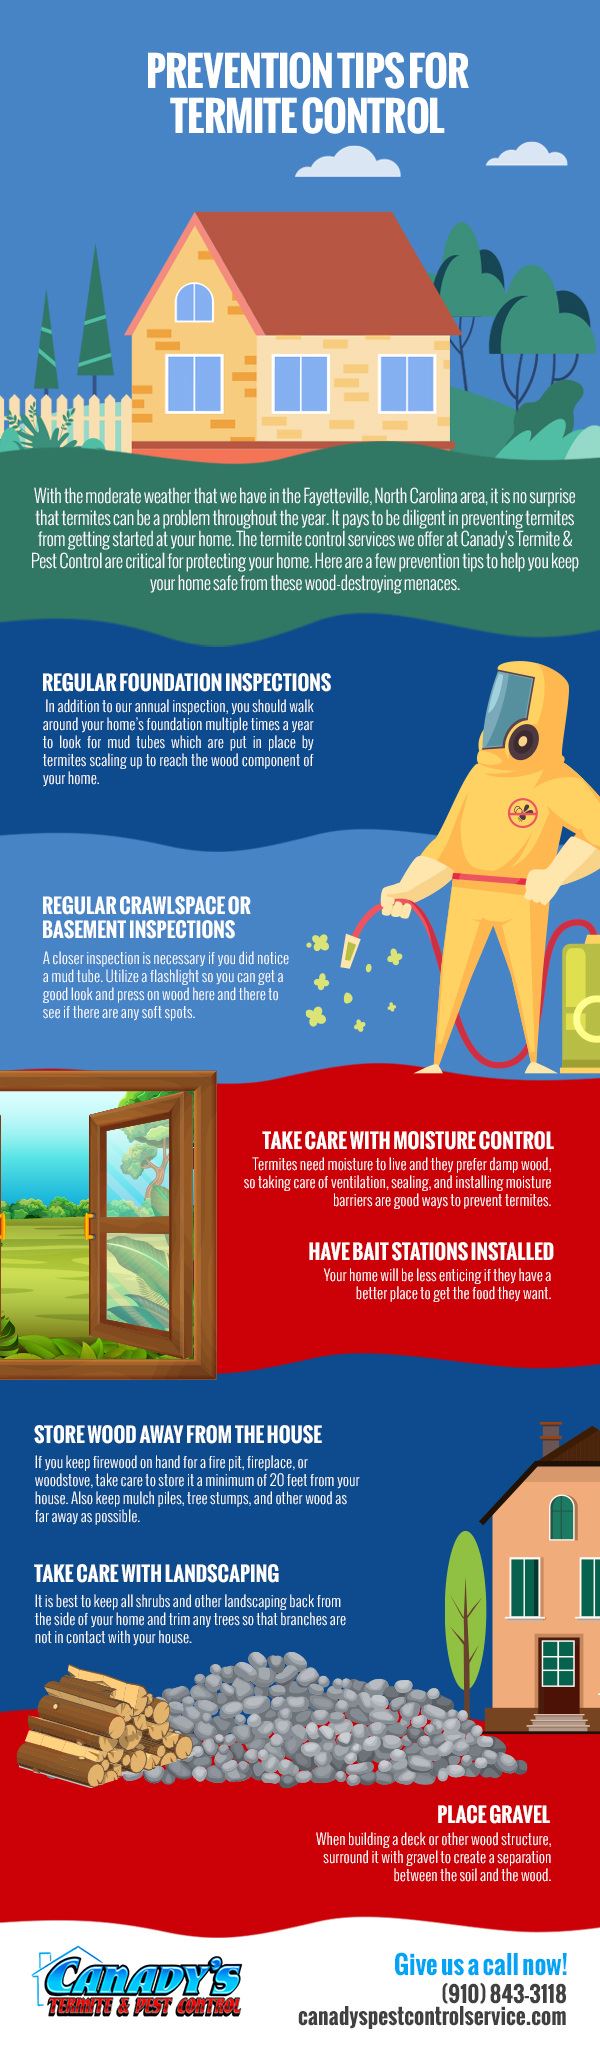 Prevention Tips for Termite Control [infographic]